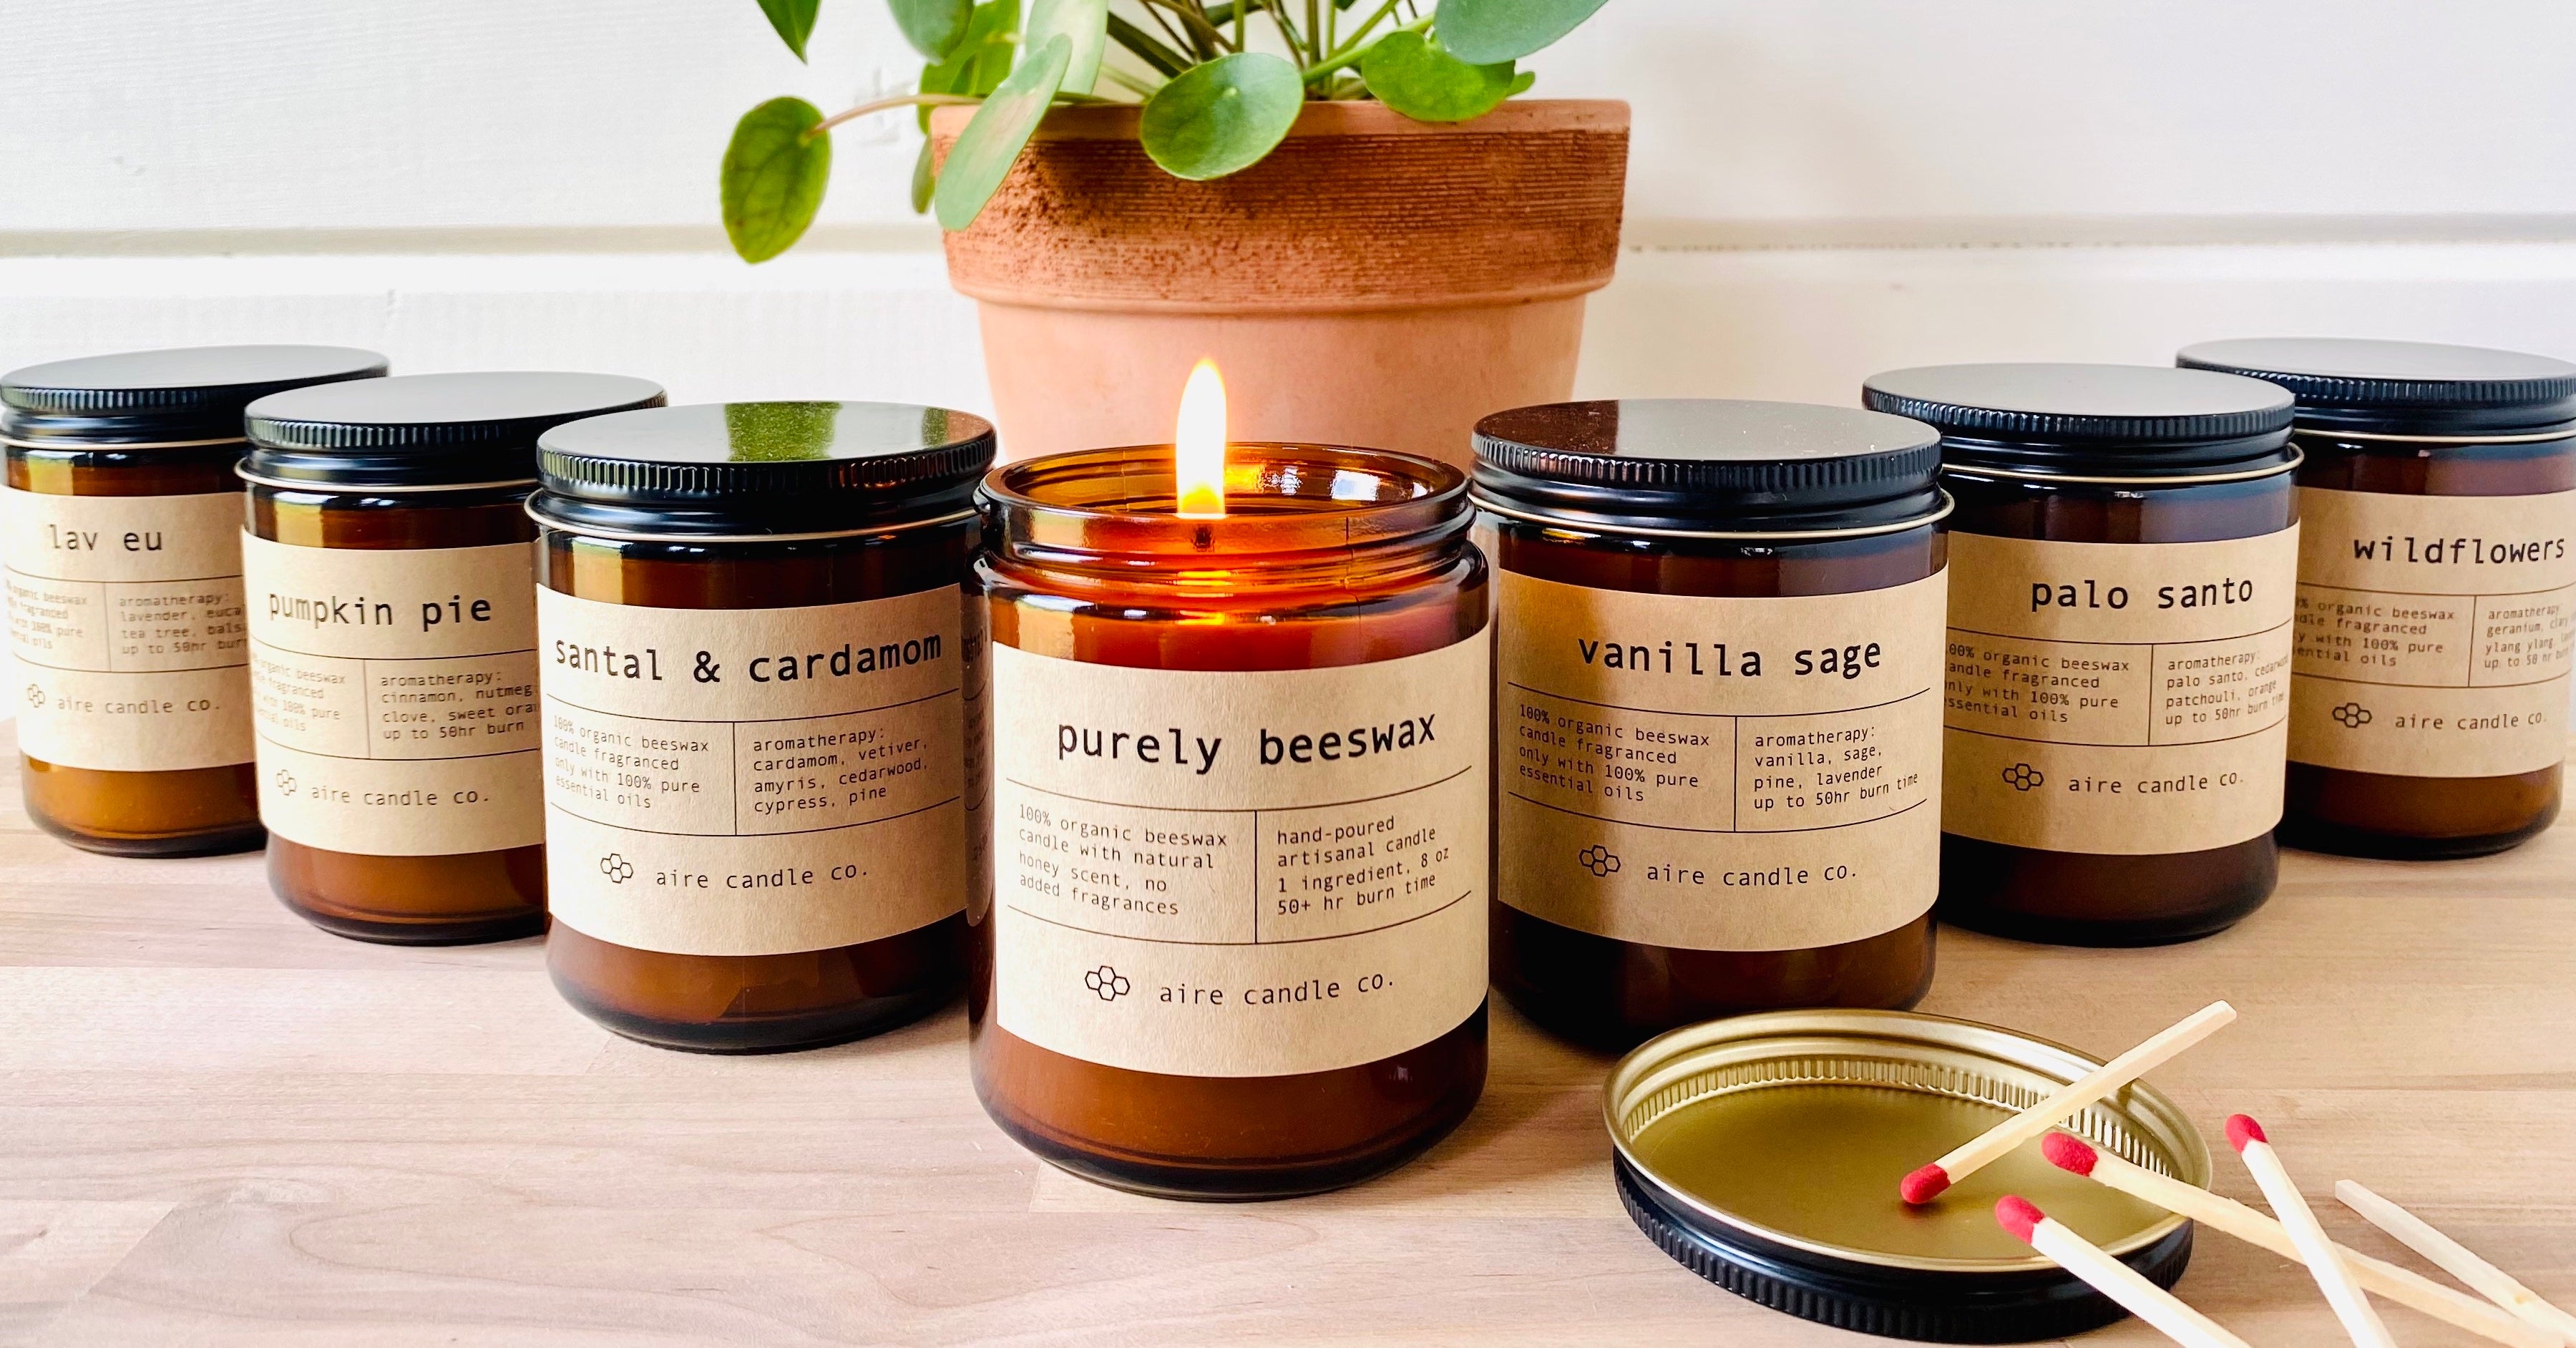 purely beeswax – aire candle co.